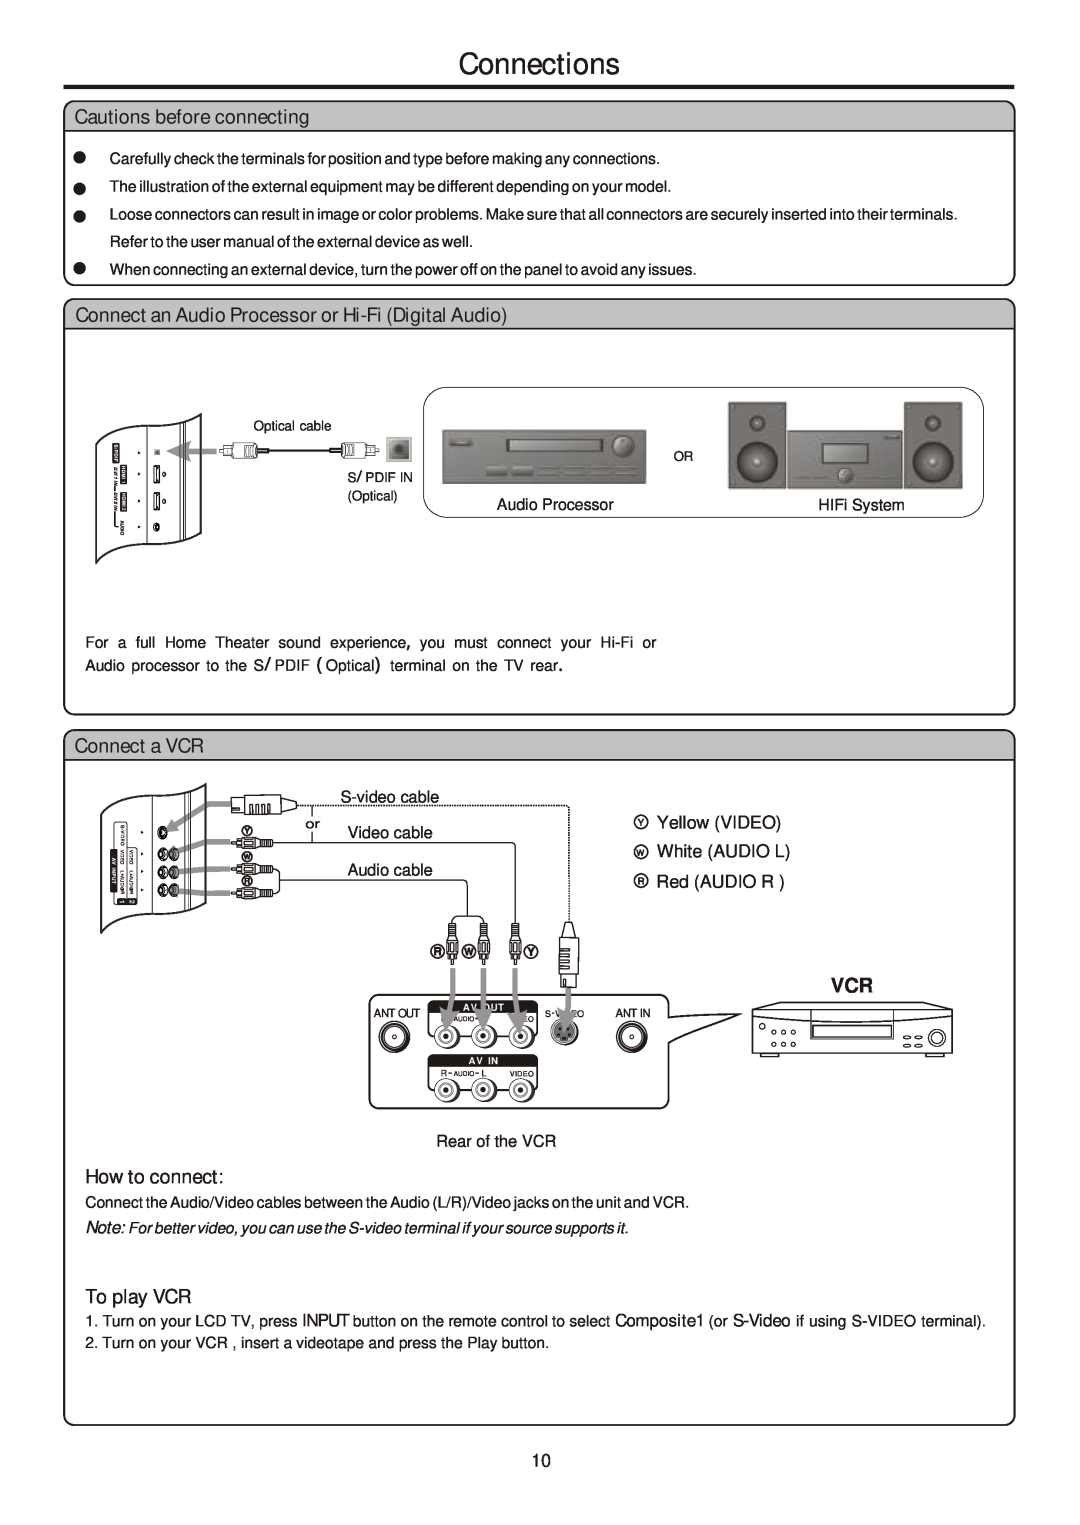 Sanyo AVL-261 Connections, Cautions before connecting, Connect an Audio Processor or Hi-Fi Digital Audio, Connect a VCR 